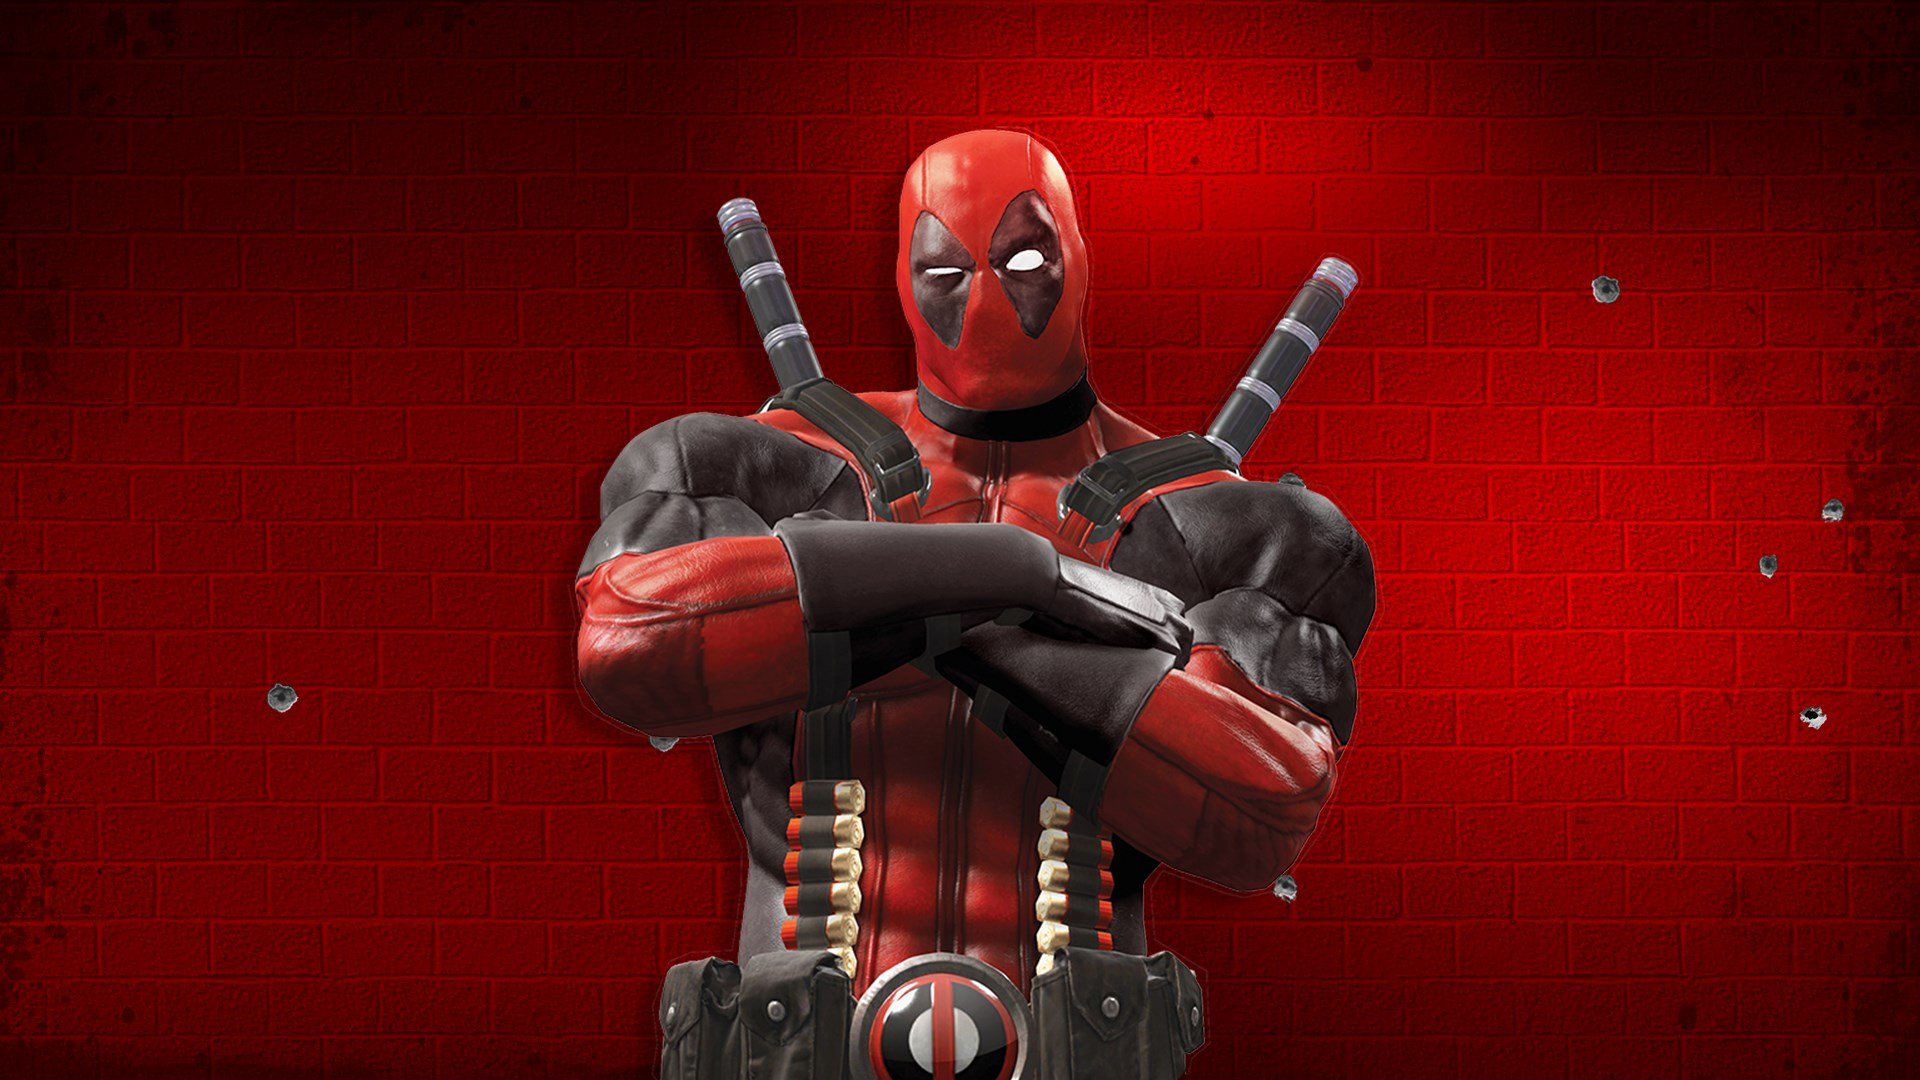 Deadpool cover image